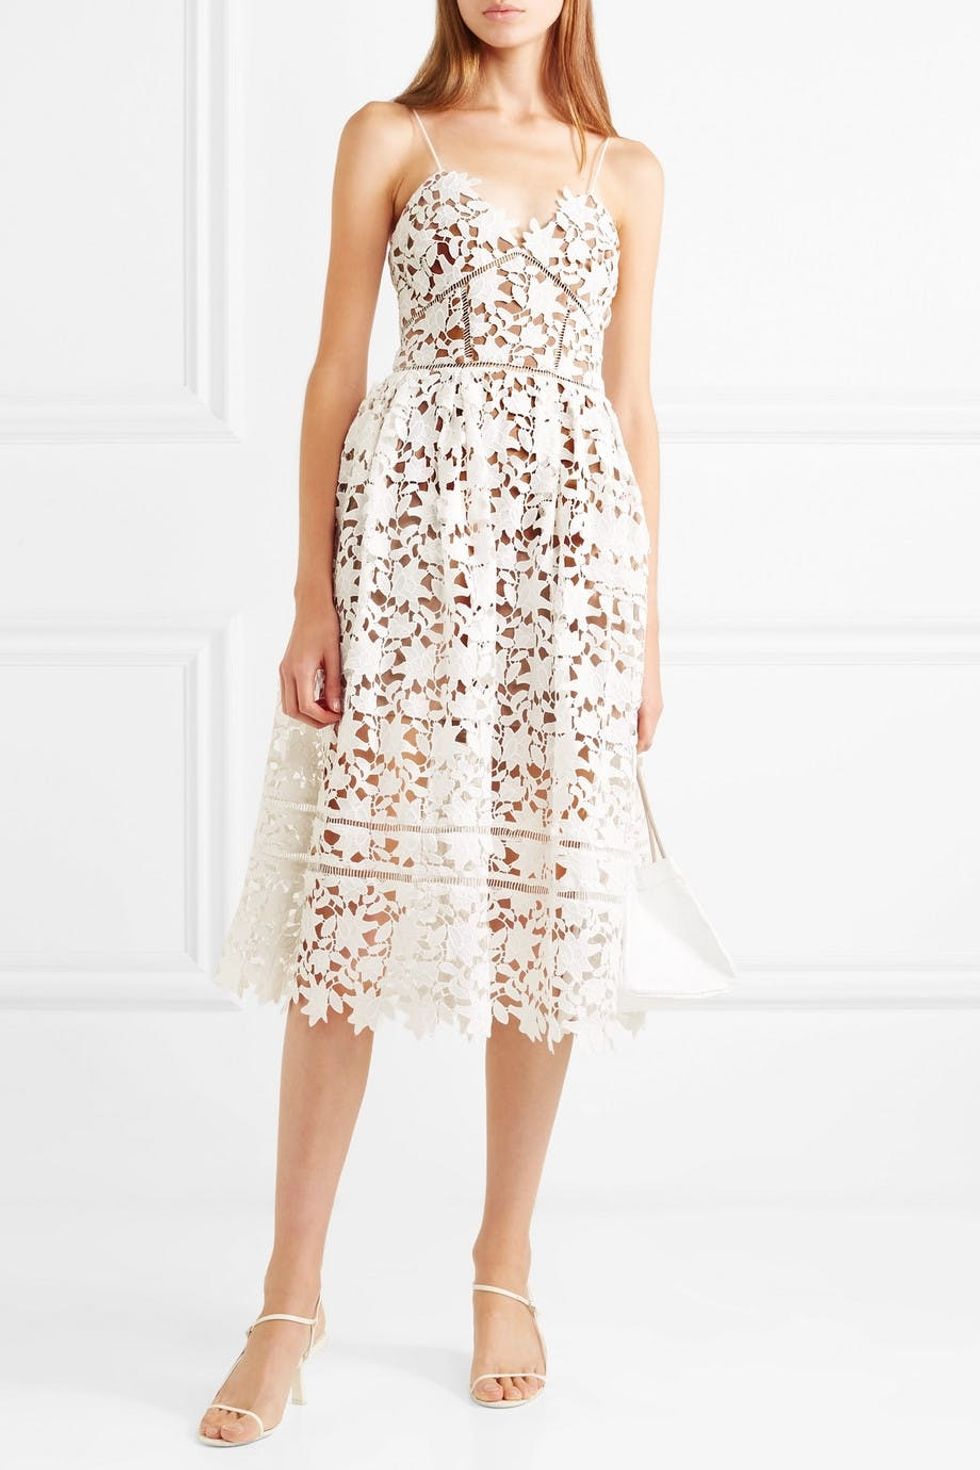 16 White Dresses That Prove Wedding Reception Outfits Are a Thing ...